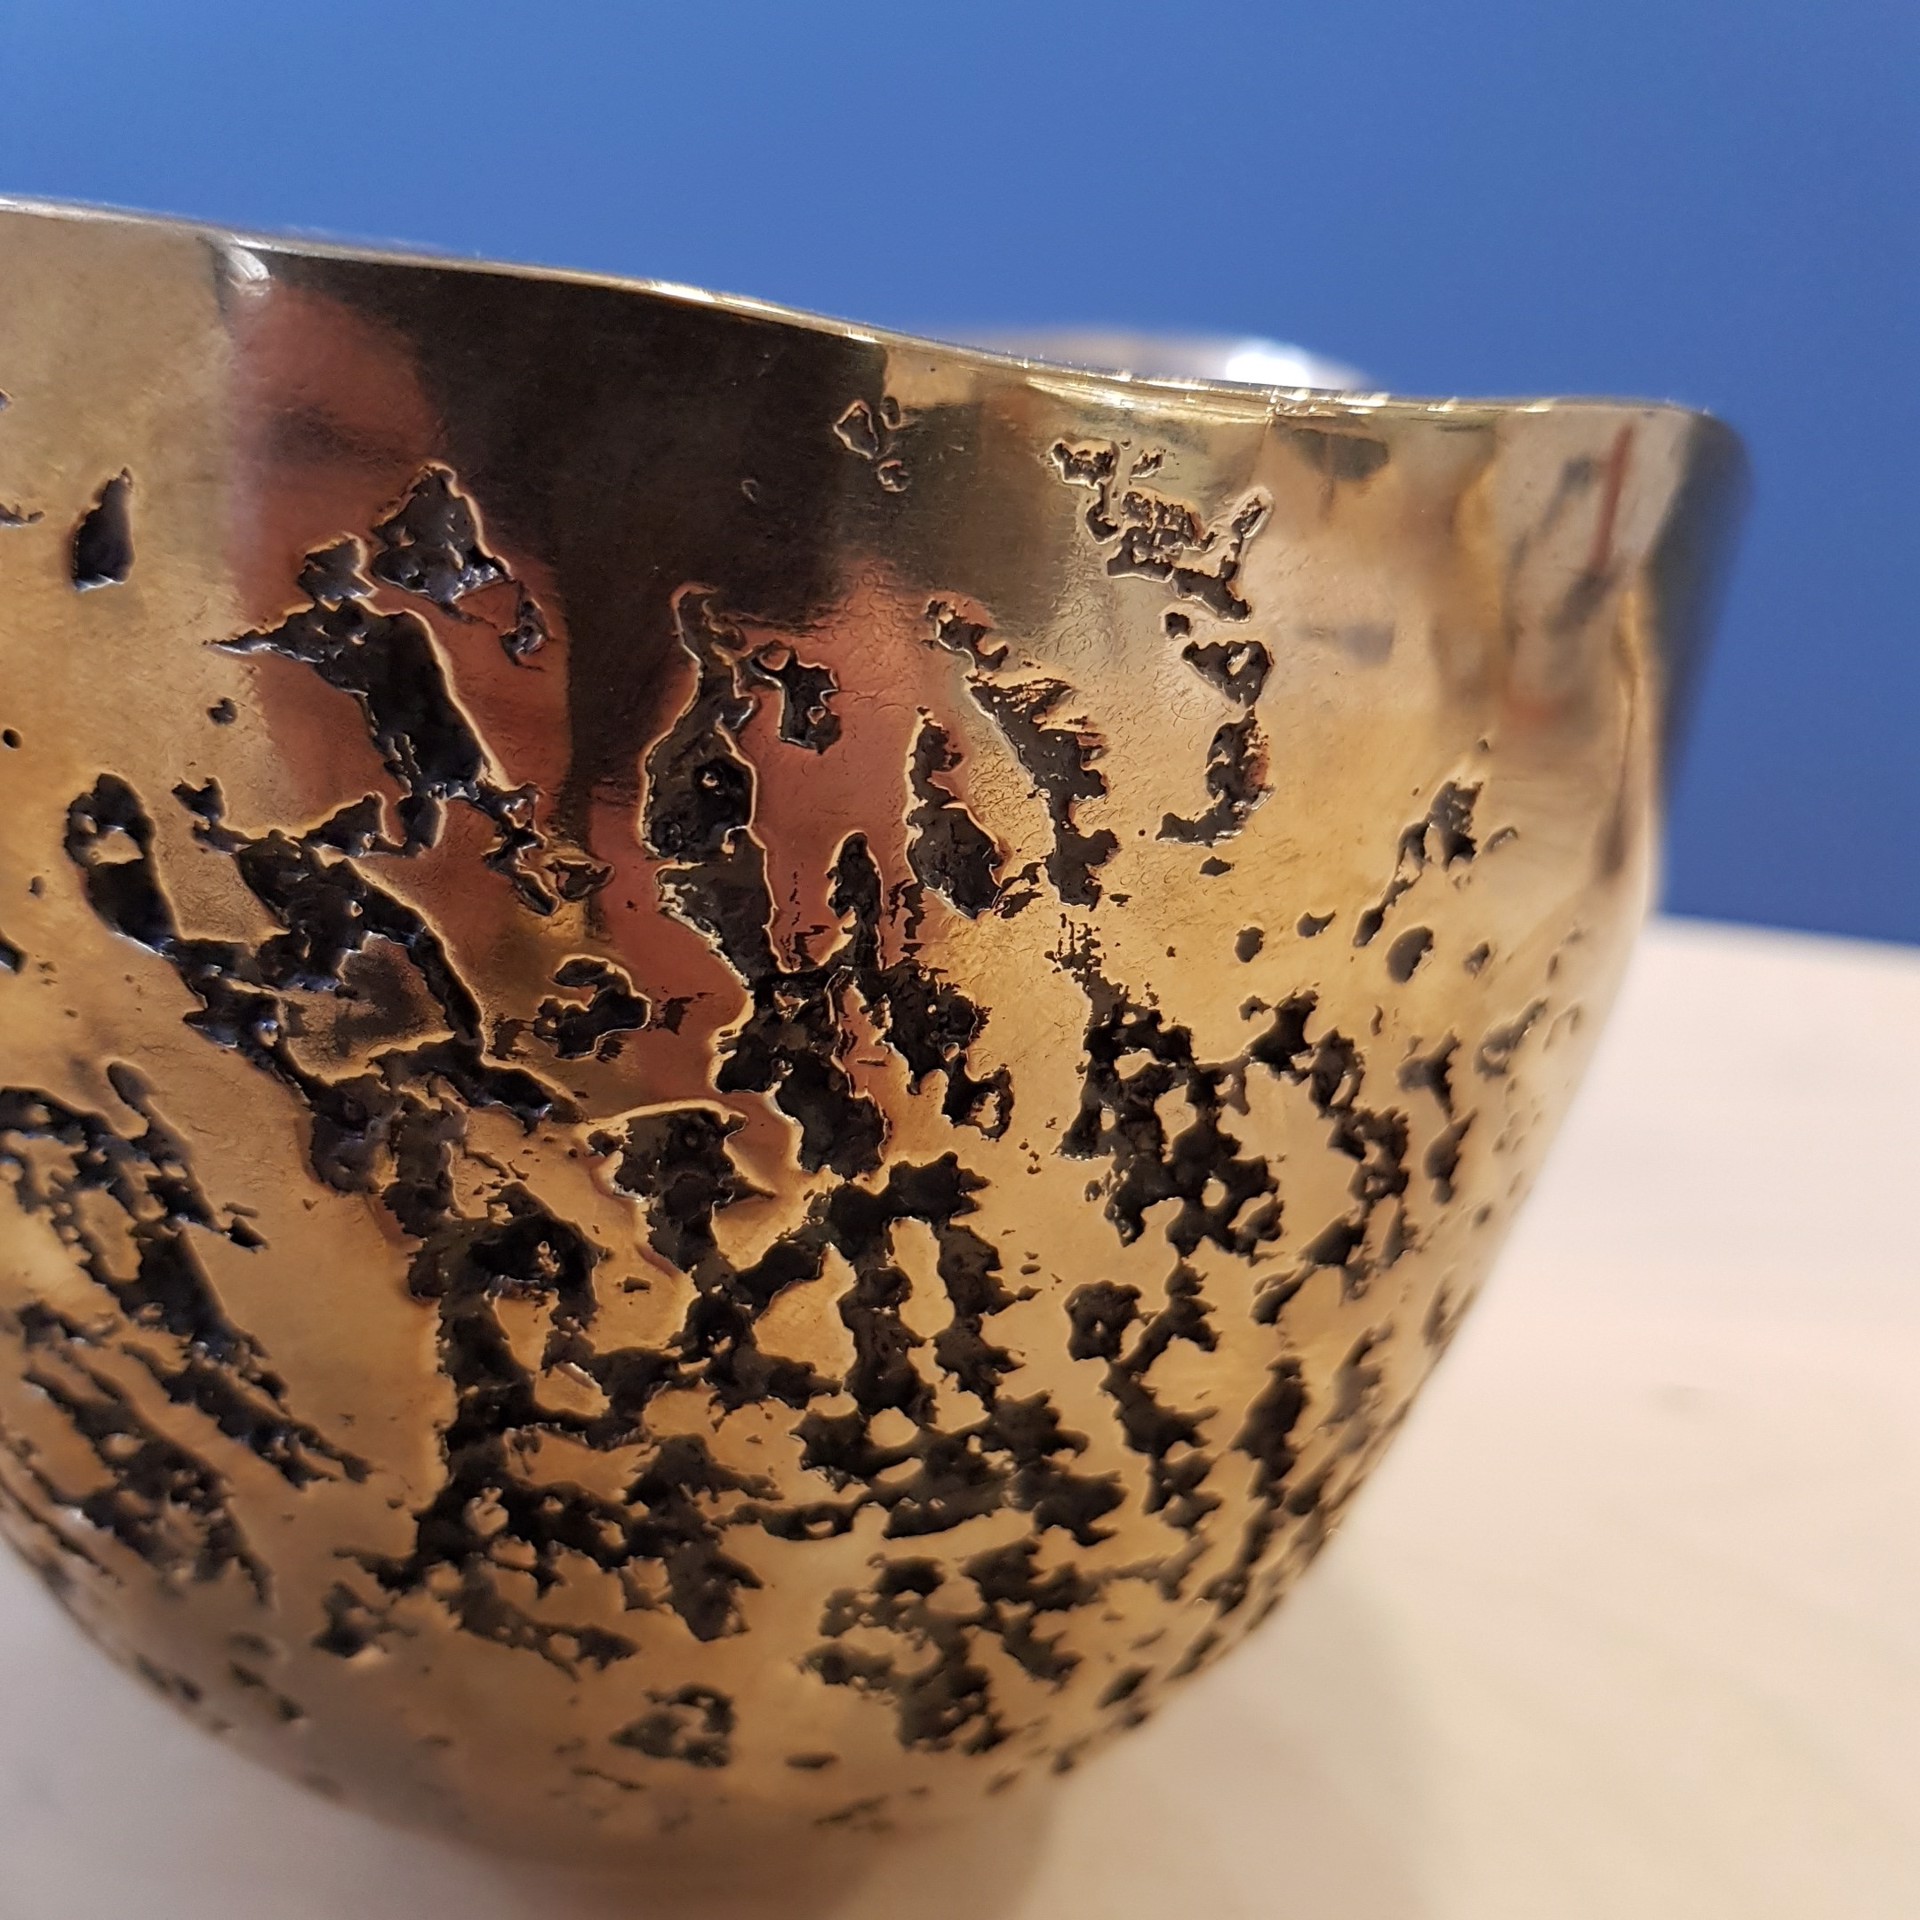 Open Form Bowl by Jack Eagan